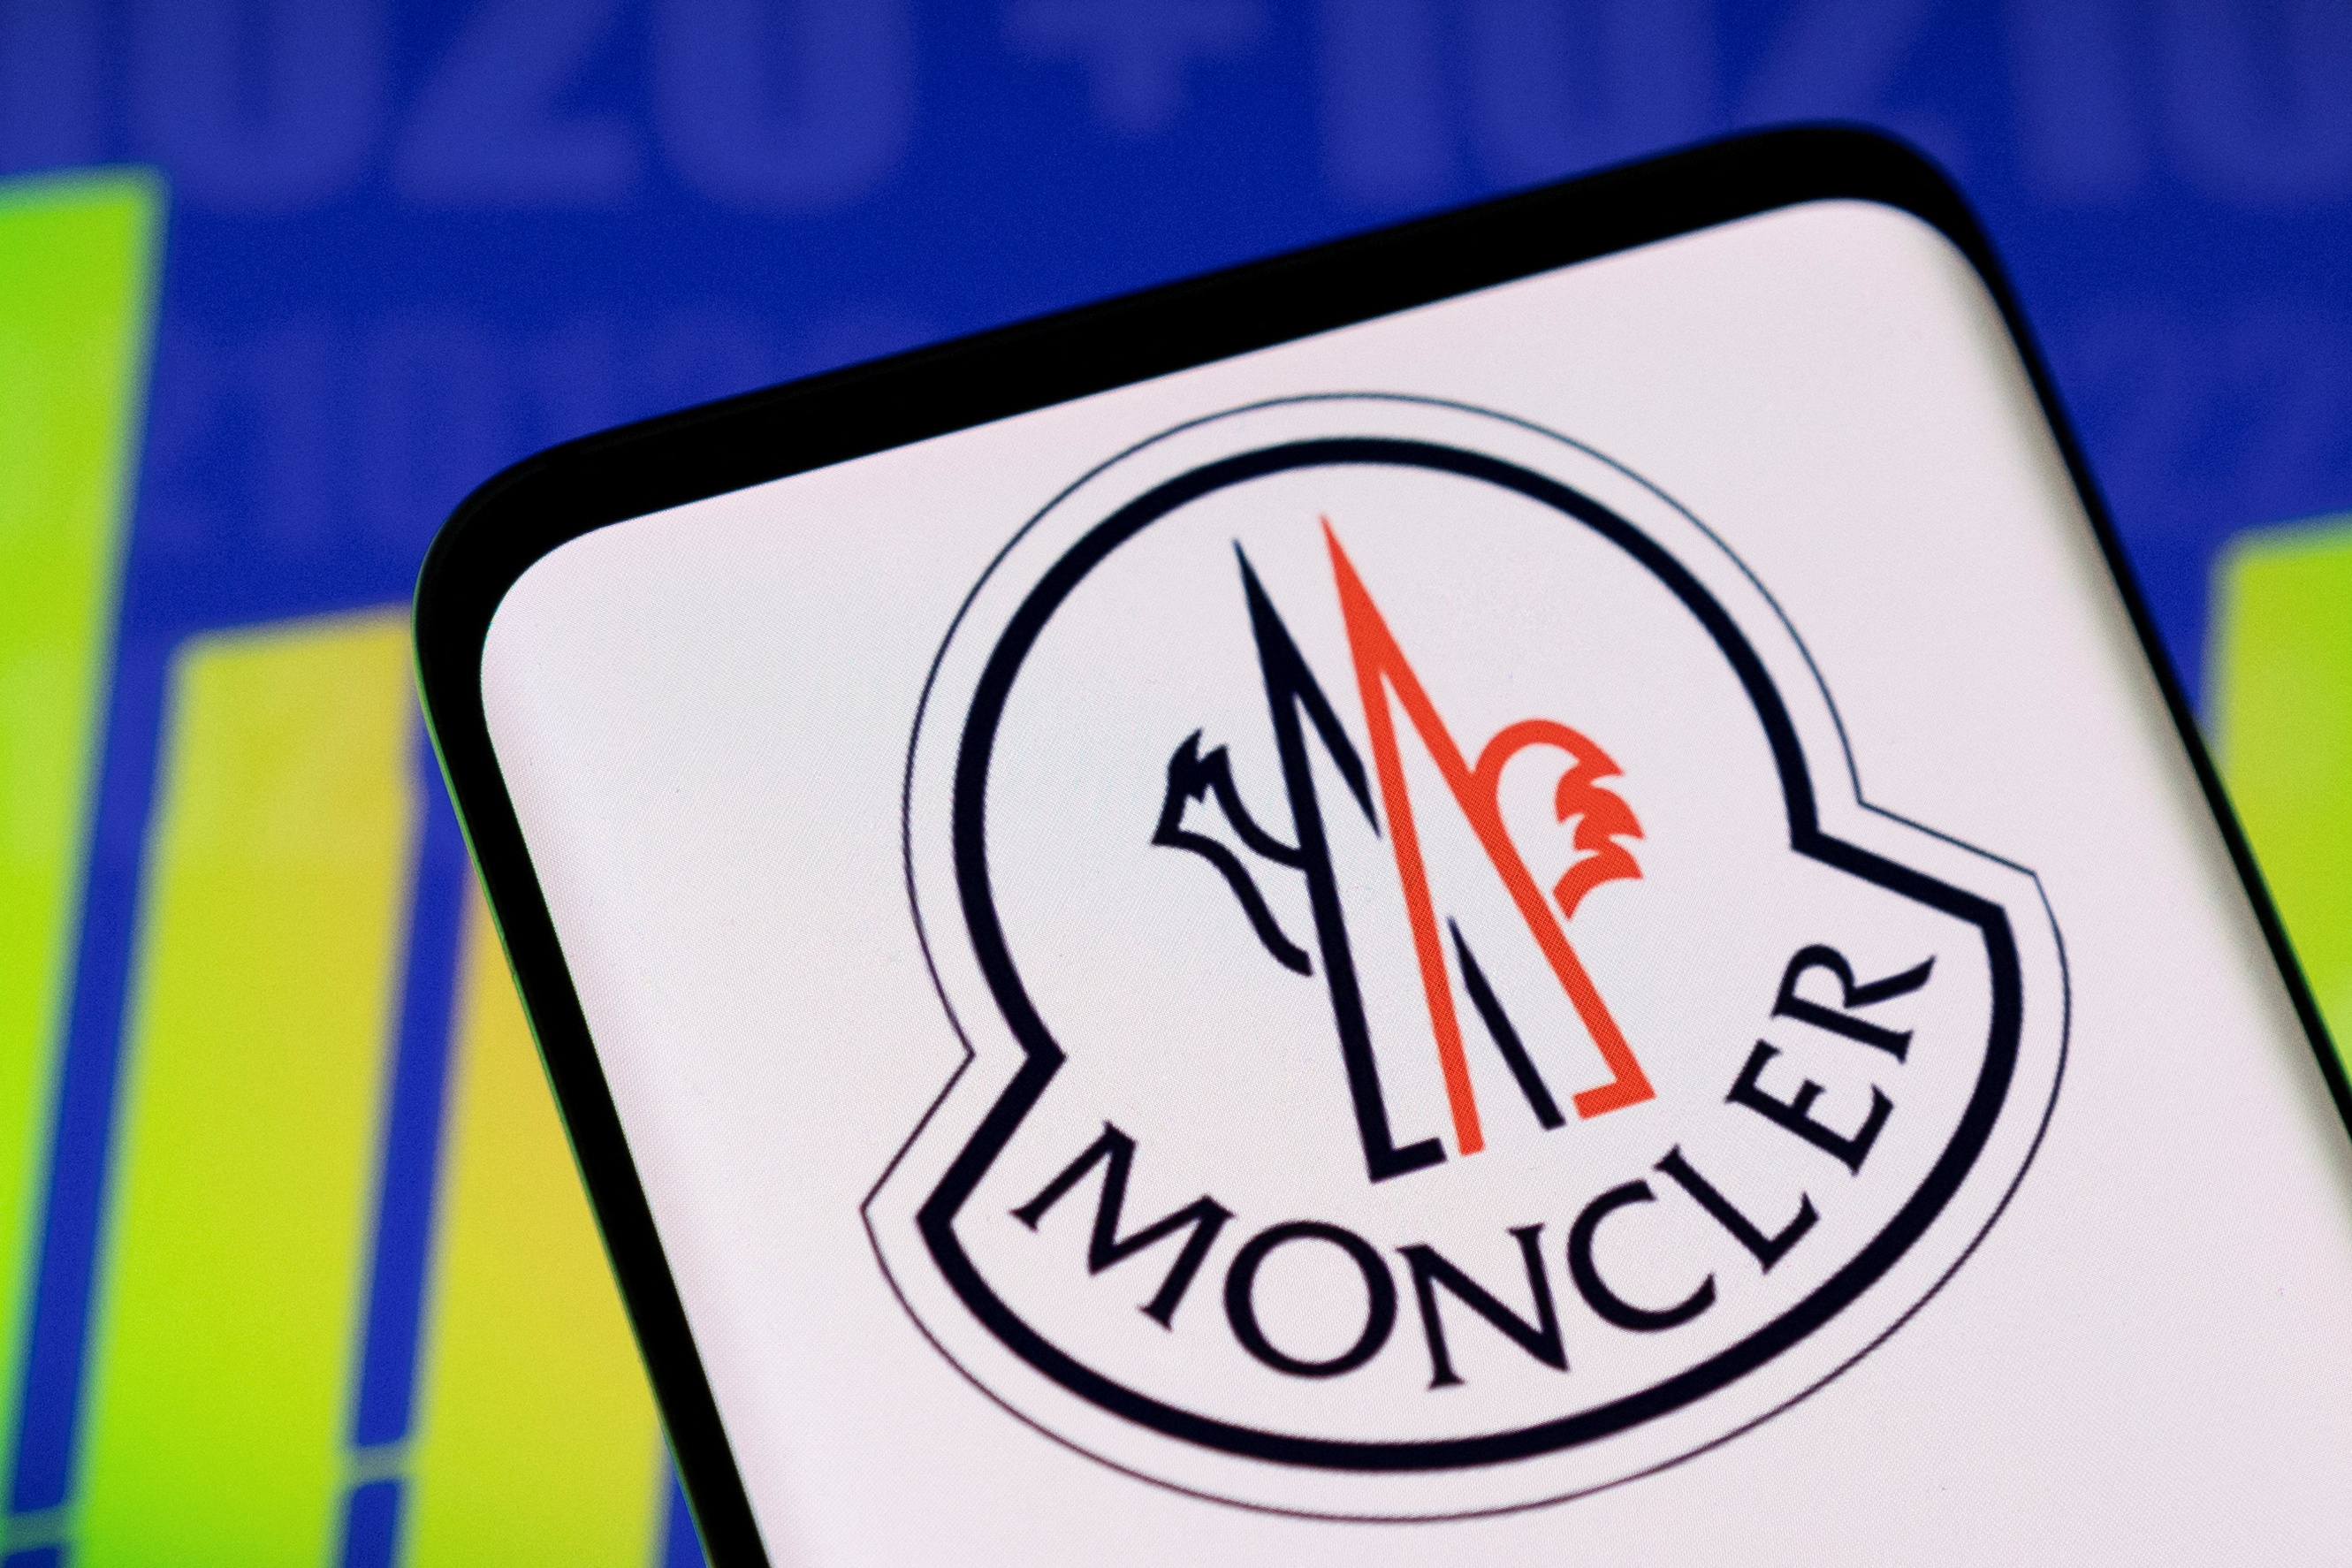 Moncler Logo And Symbol, Meaning, History, PNG, Brand | vlr.eng.br